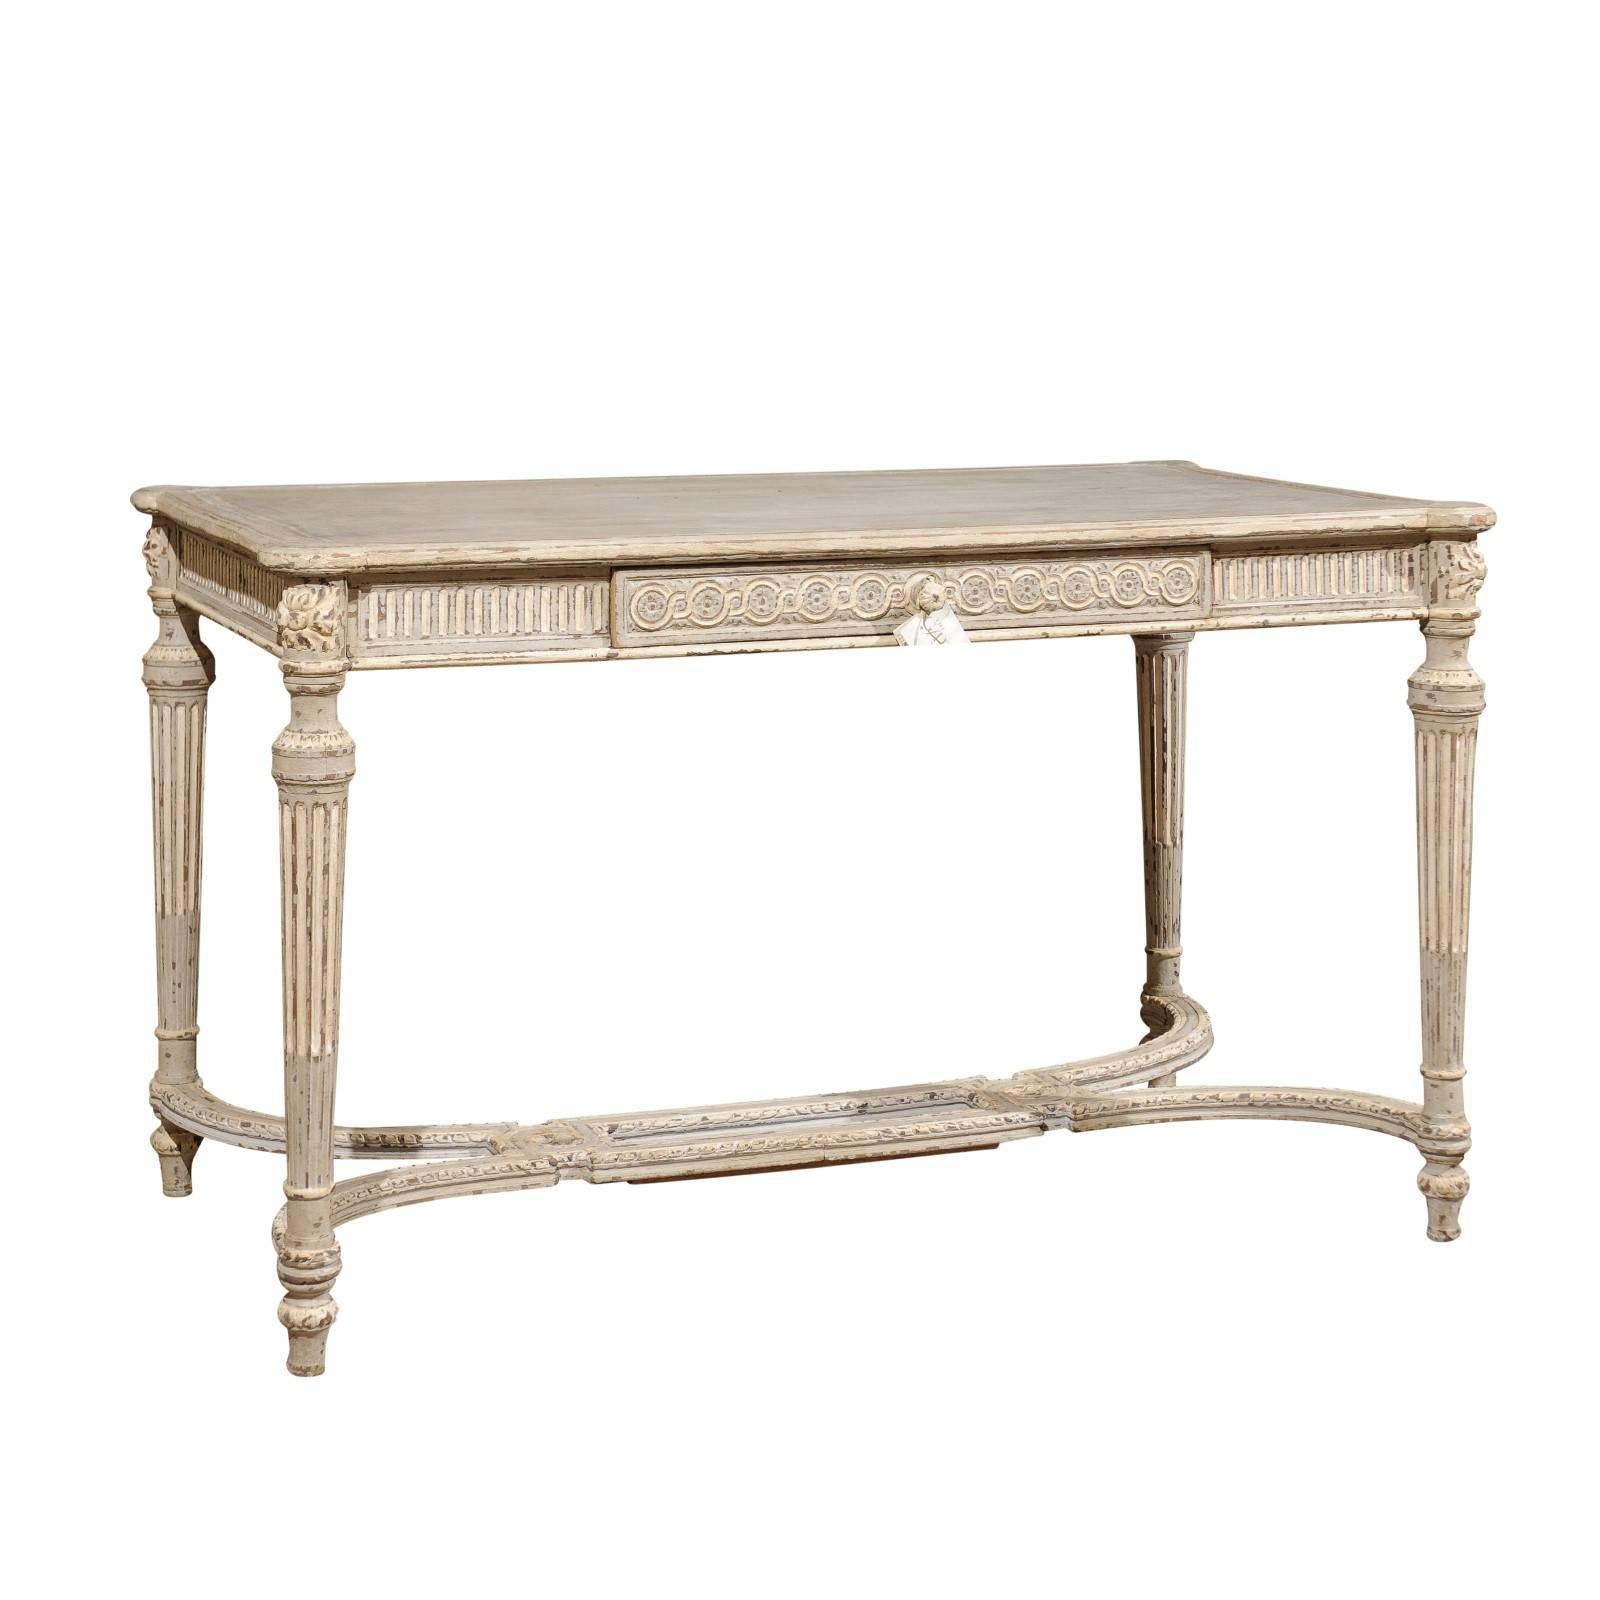 19th Century Louis XVI Style Painted Center Table